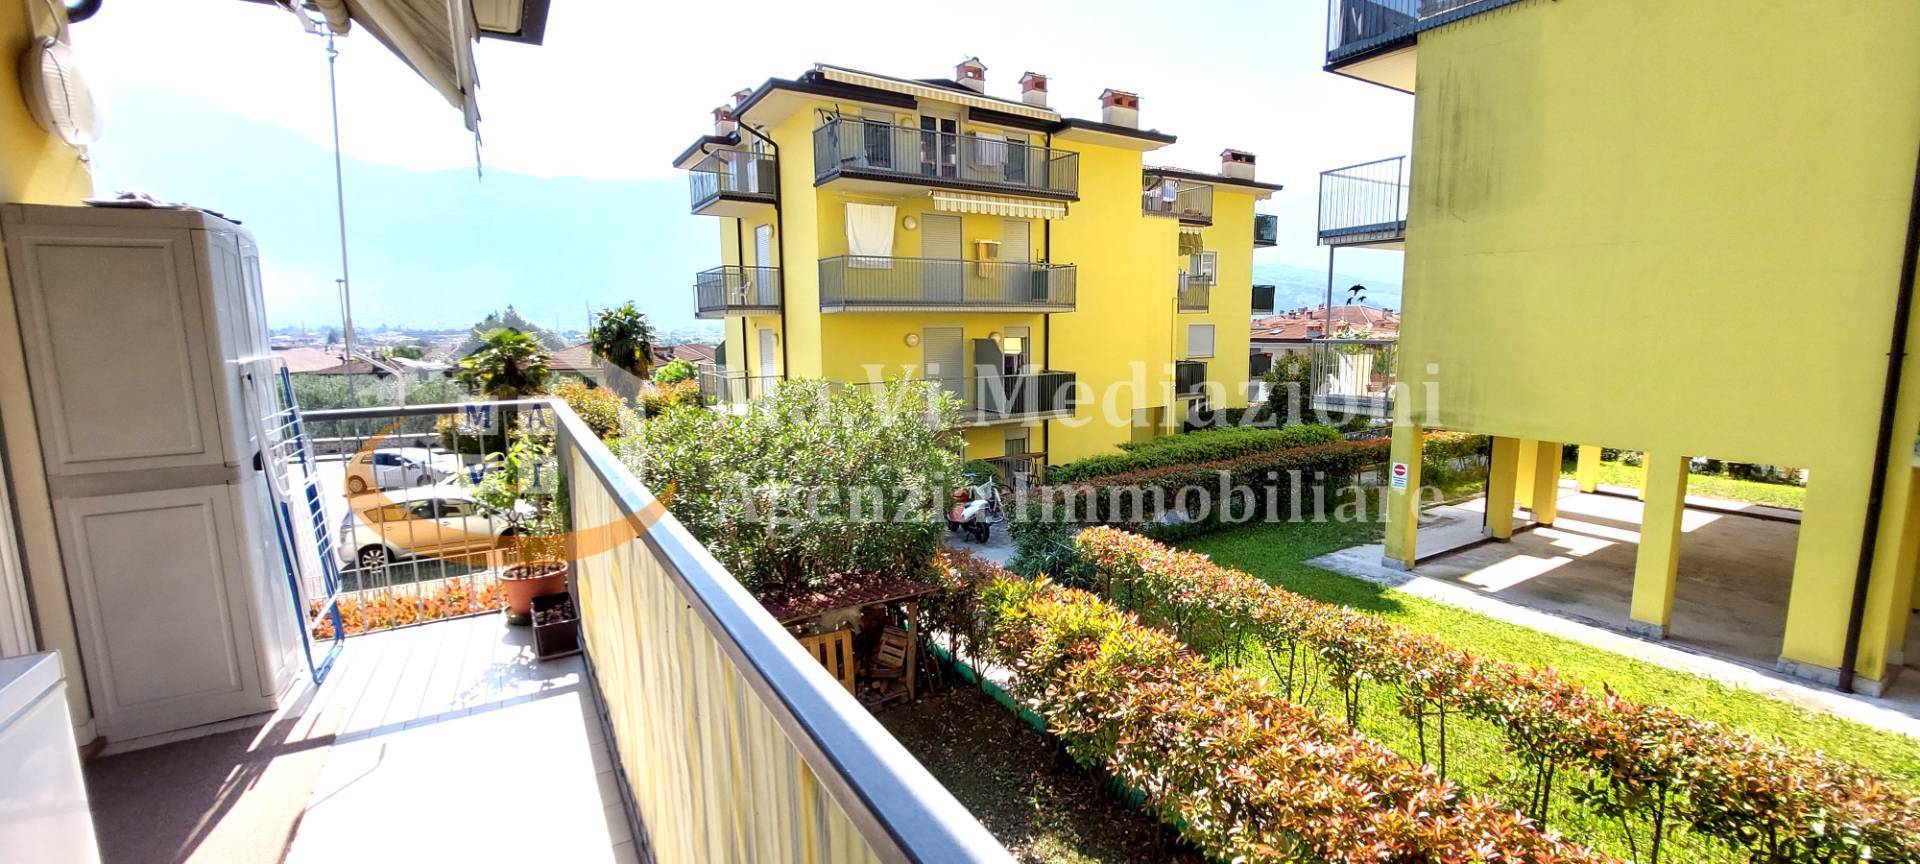 Apartment in sale a Arco